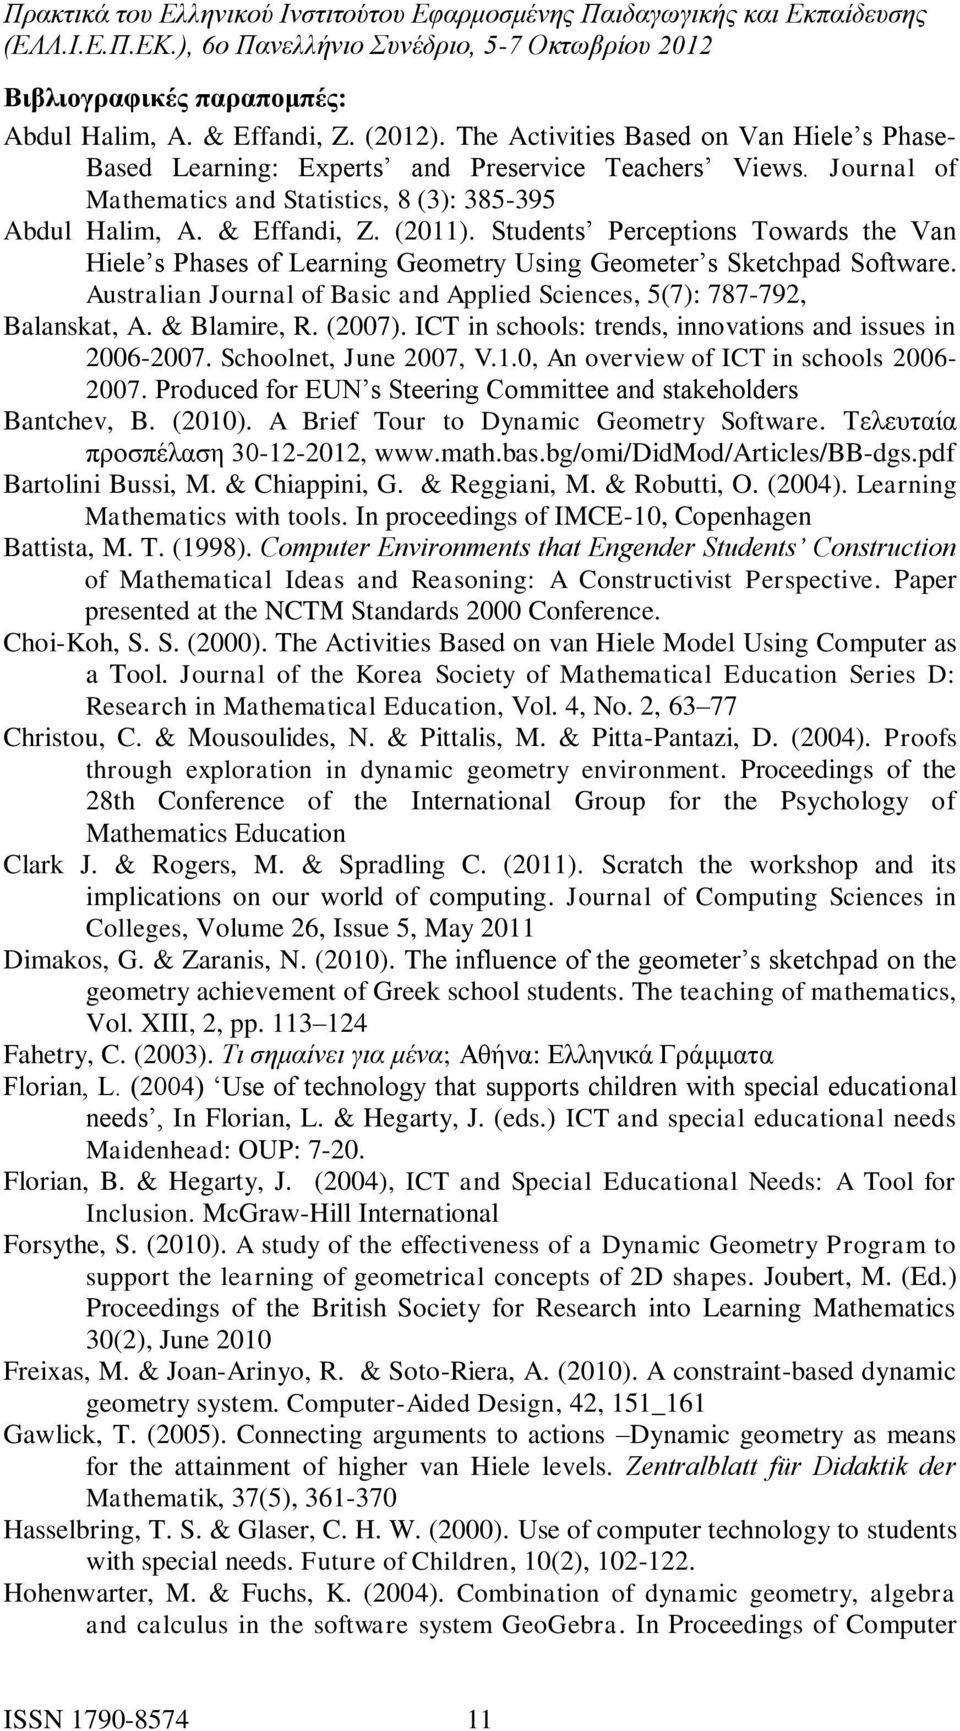 Students Perceptions Towards the Van Hiele s Phases of Learning Geometry Using Geometer s Sketchpad Software. Australian Journal of Basic and Applied Sciences, 5(7): 787-792, Balanskat, A.